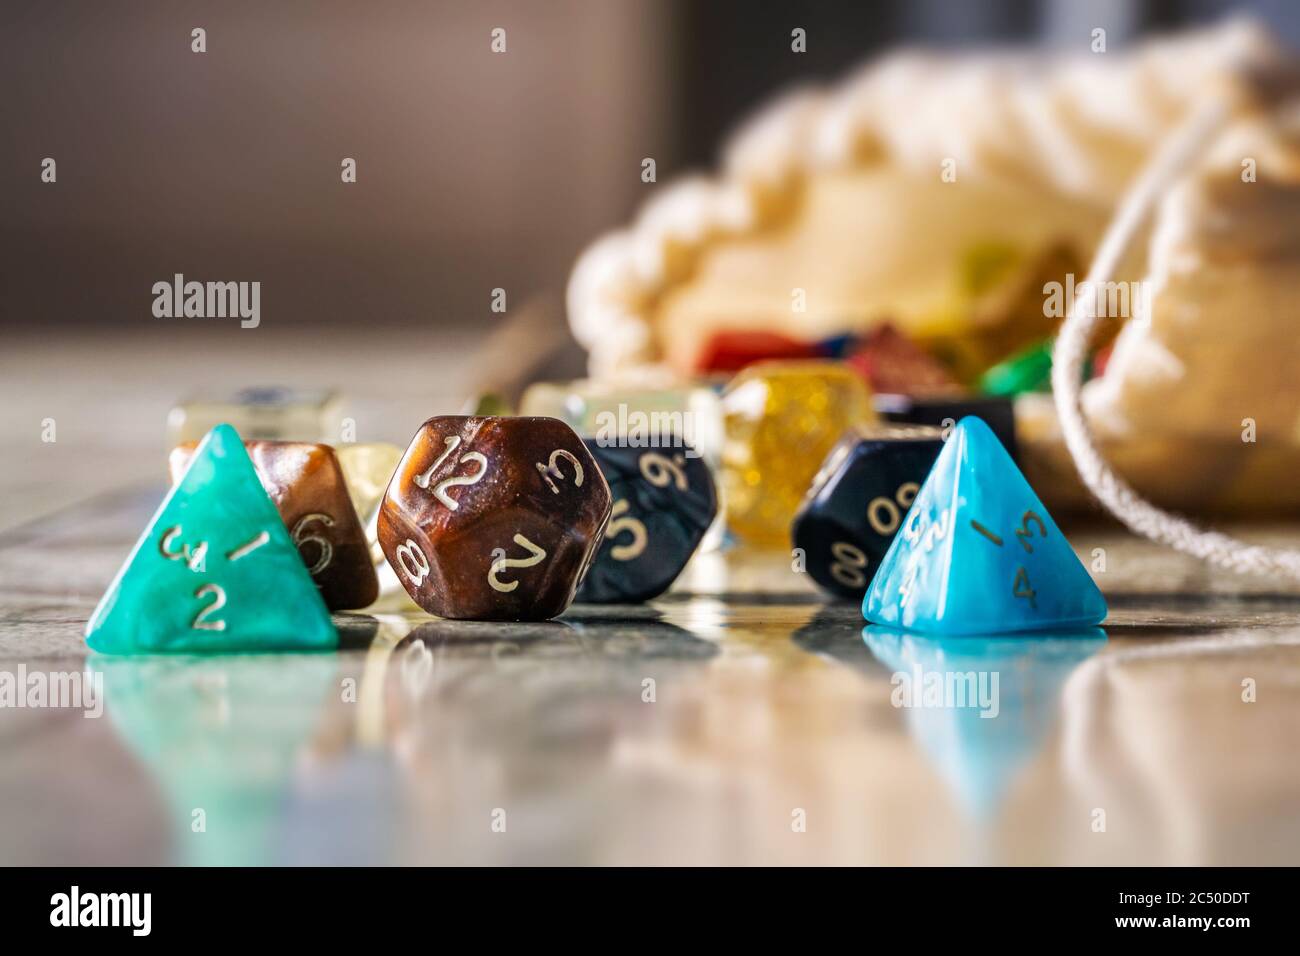 31,132 Role Playing Game Images, Stock Photos, 3D objects